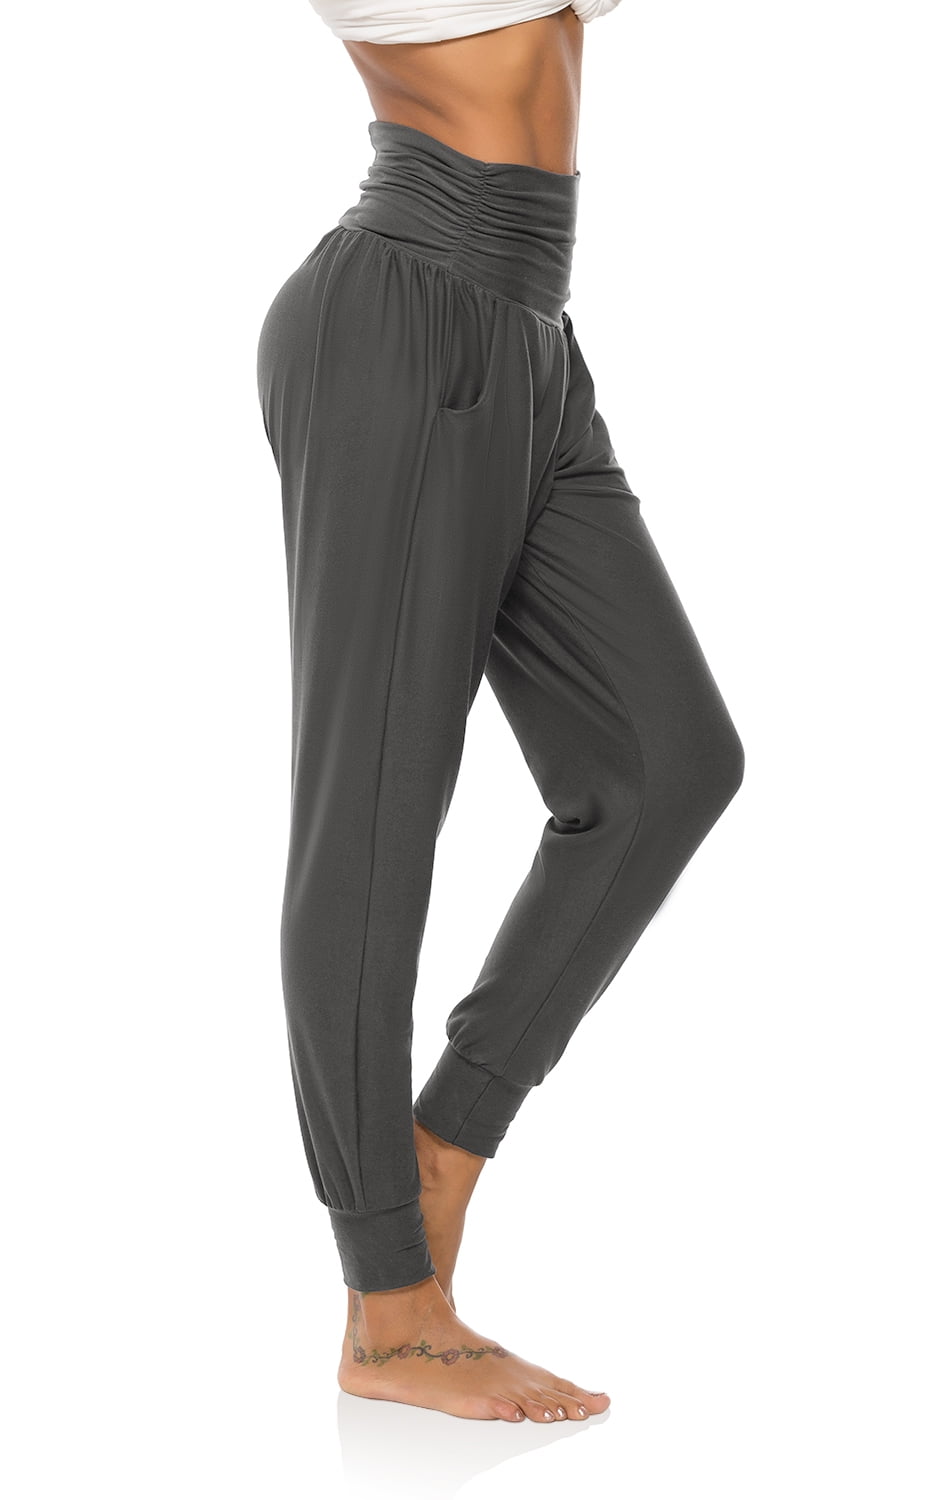 BEJONS Women Loose Fit Joggers Lounge Pants Sweatpants with India